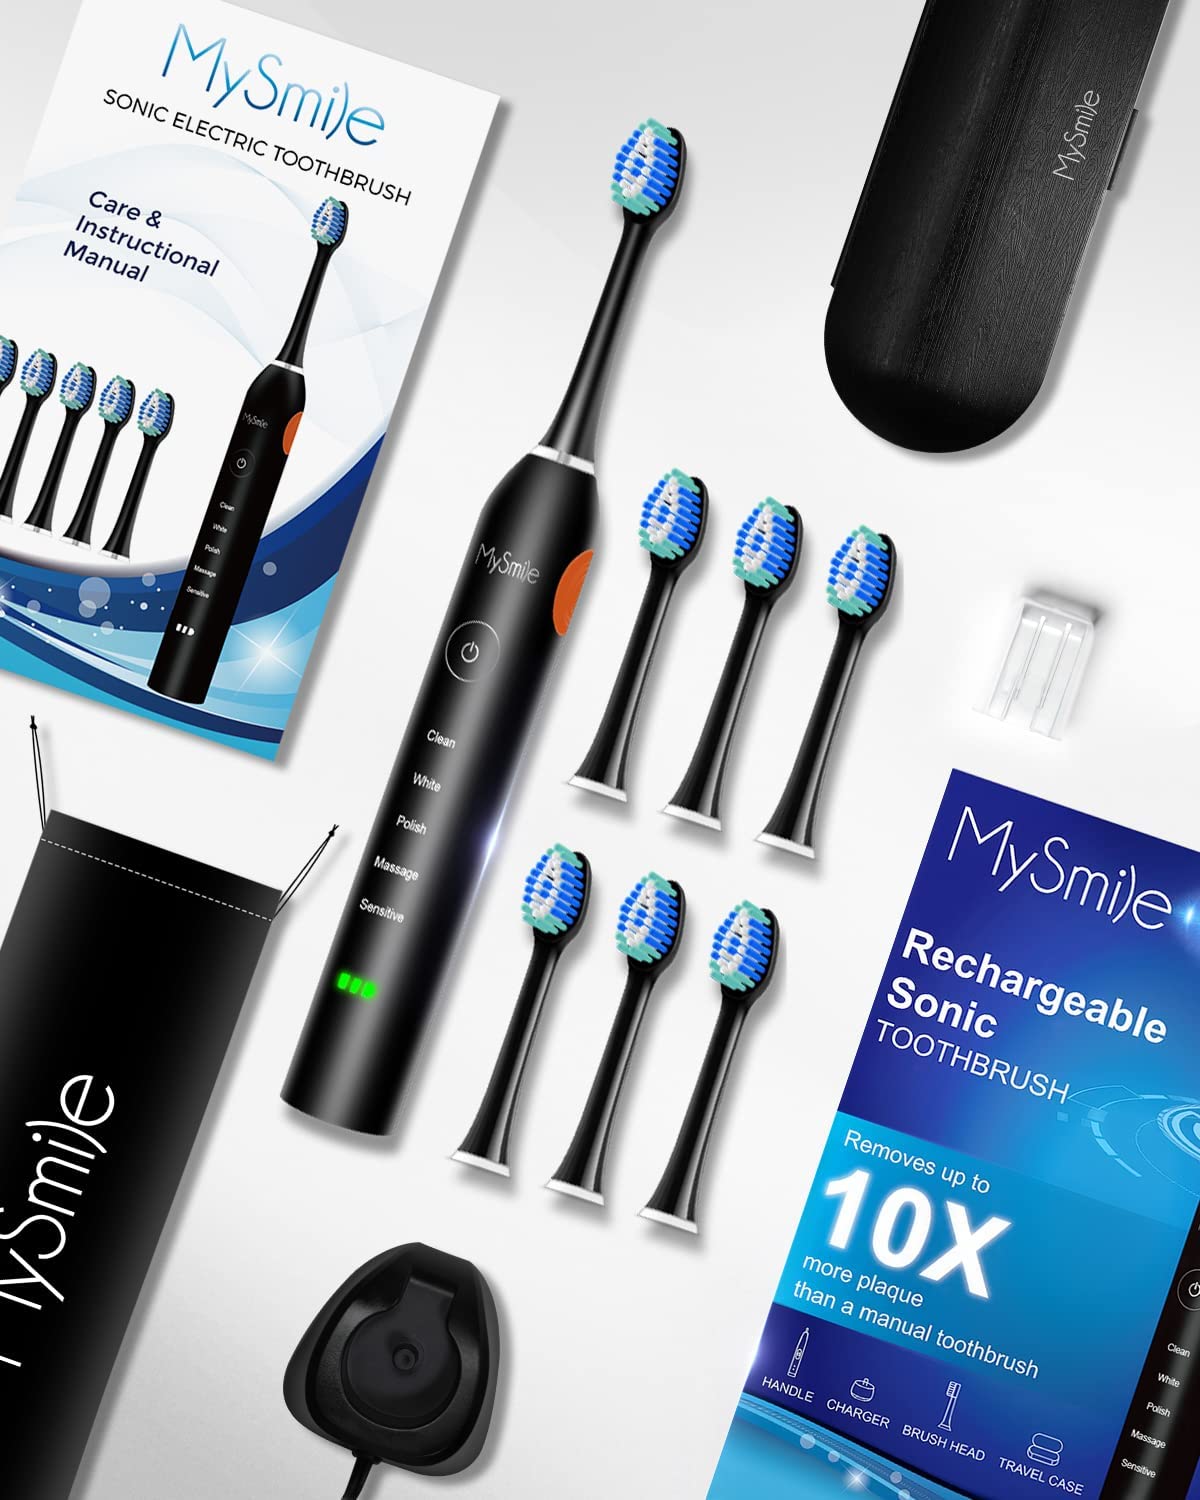 MySmile® Rechargeable Sonic Electronic Toothbrush with 6 Brush Heads & Travel Case